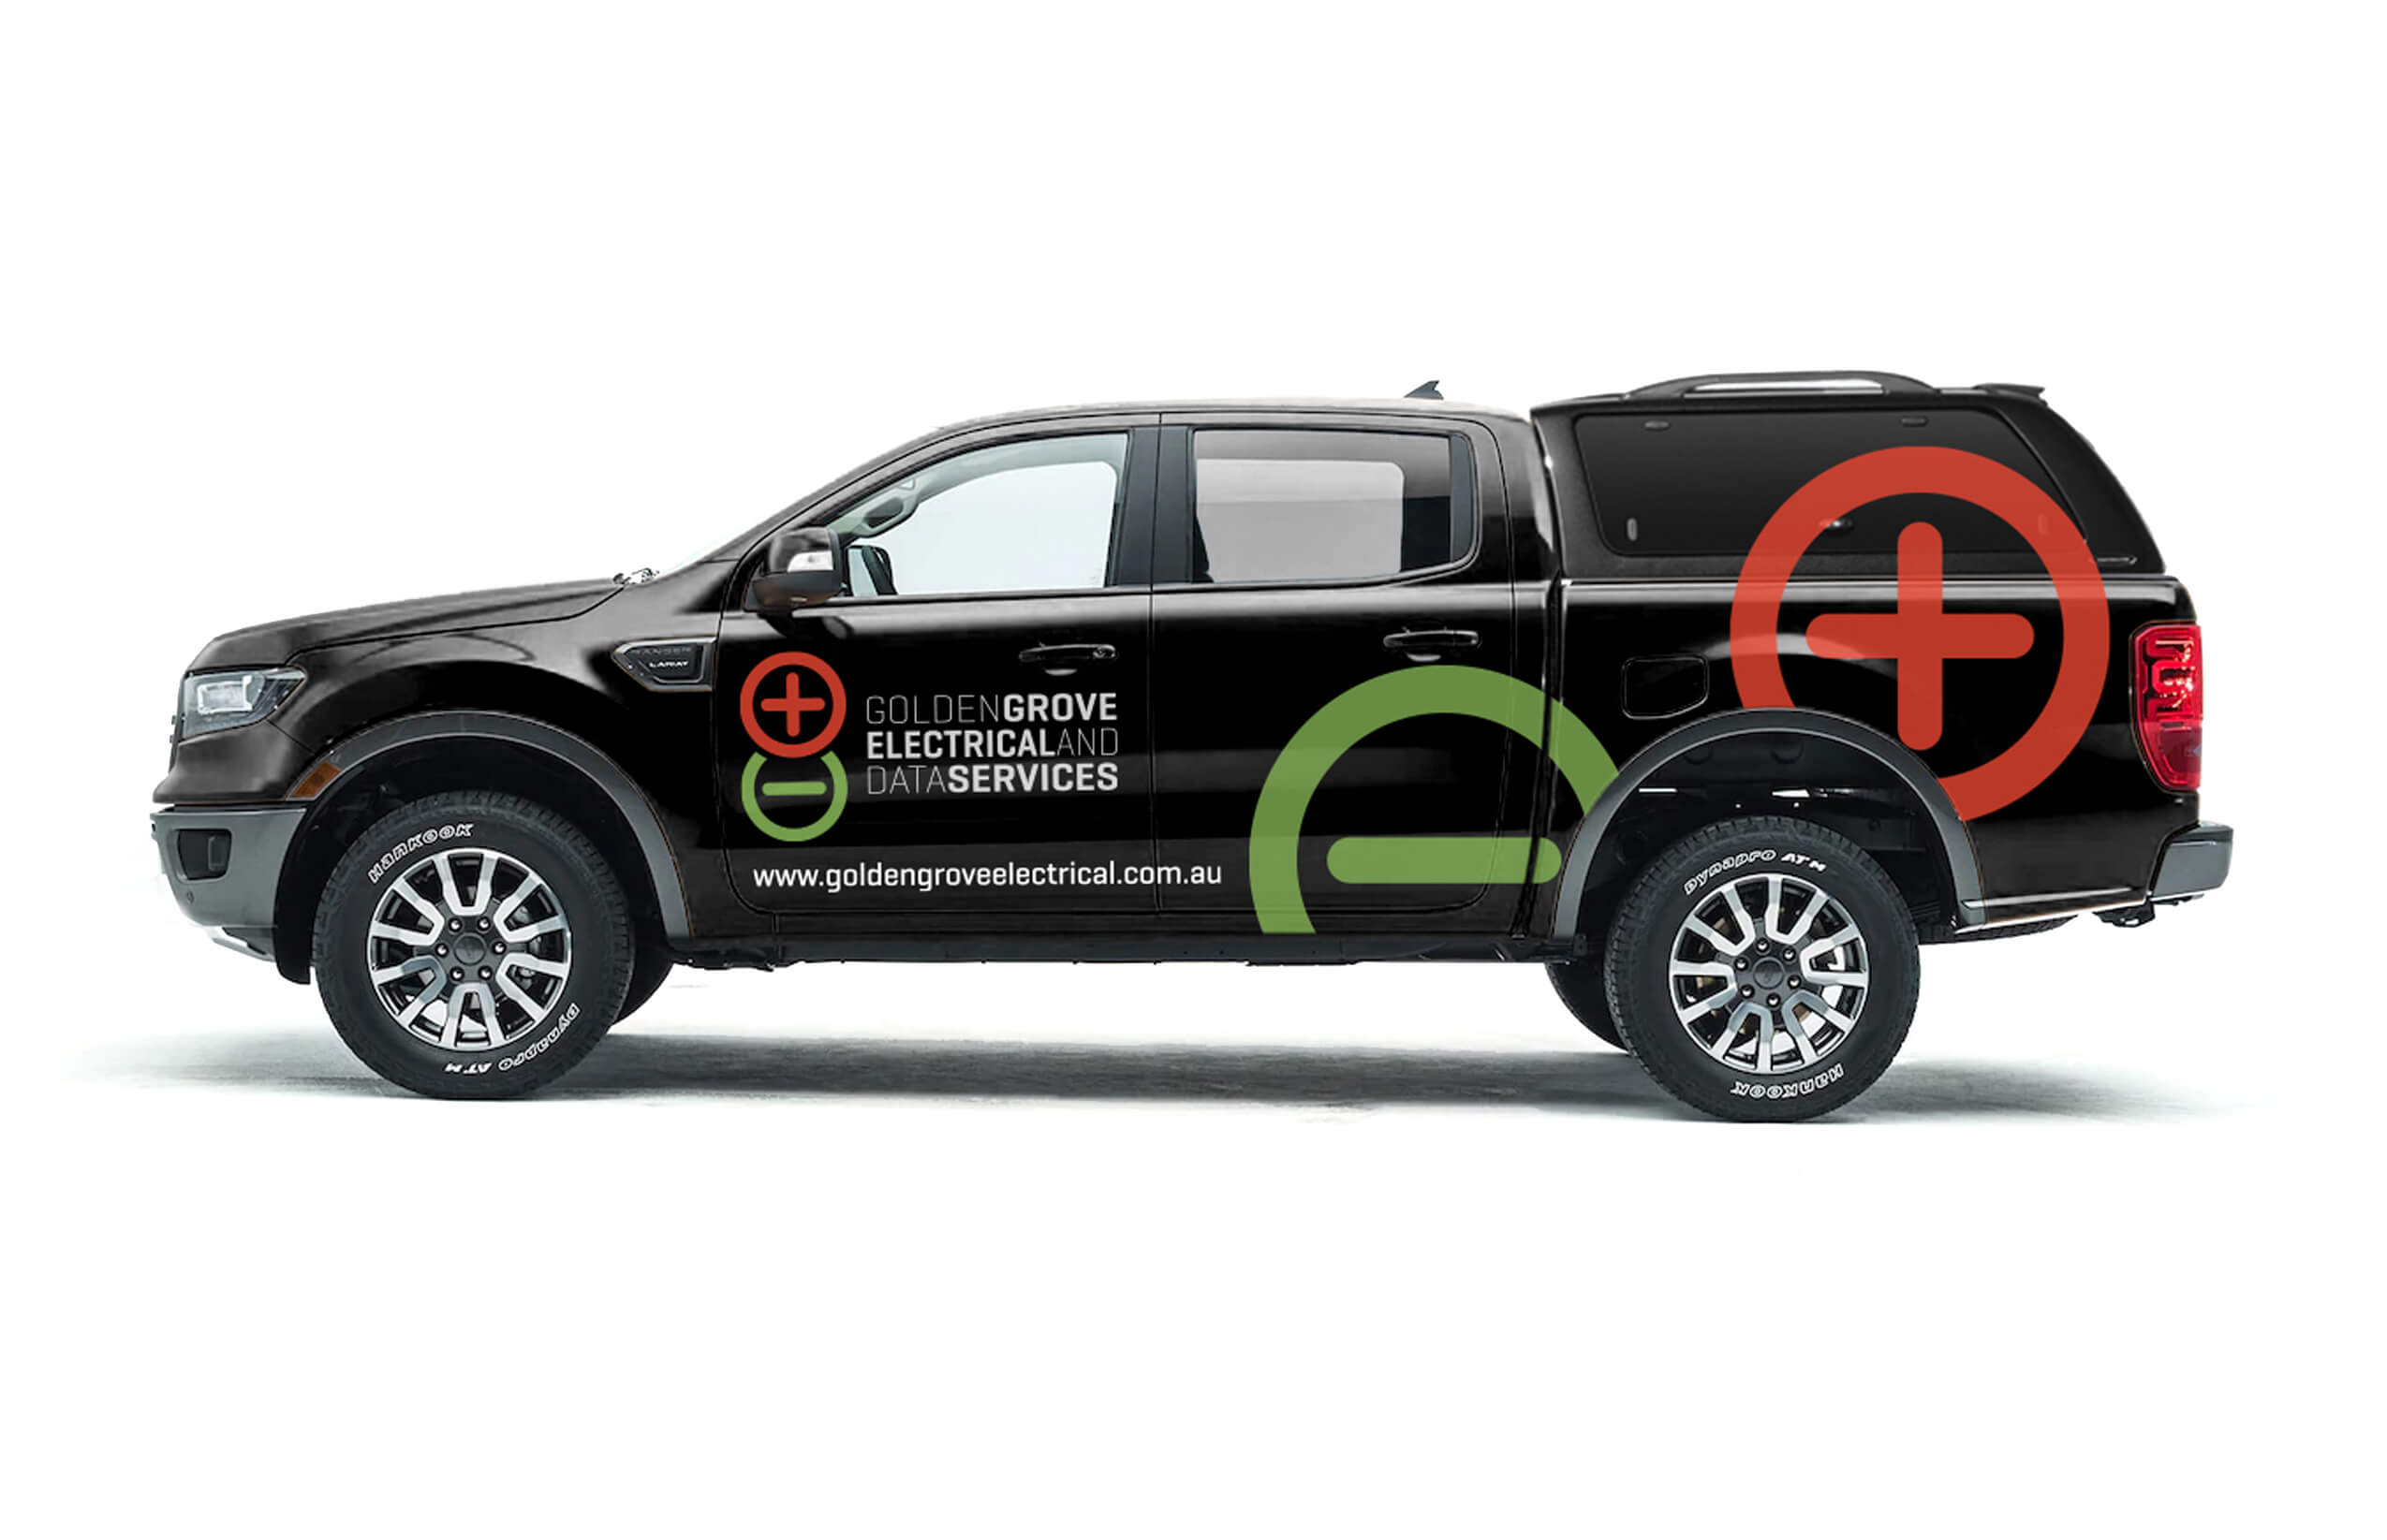 Icon Web Design Adelaide. Image of the Golden Grove Electrical & Data Services work ute with their logo over it.